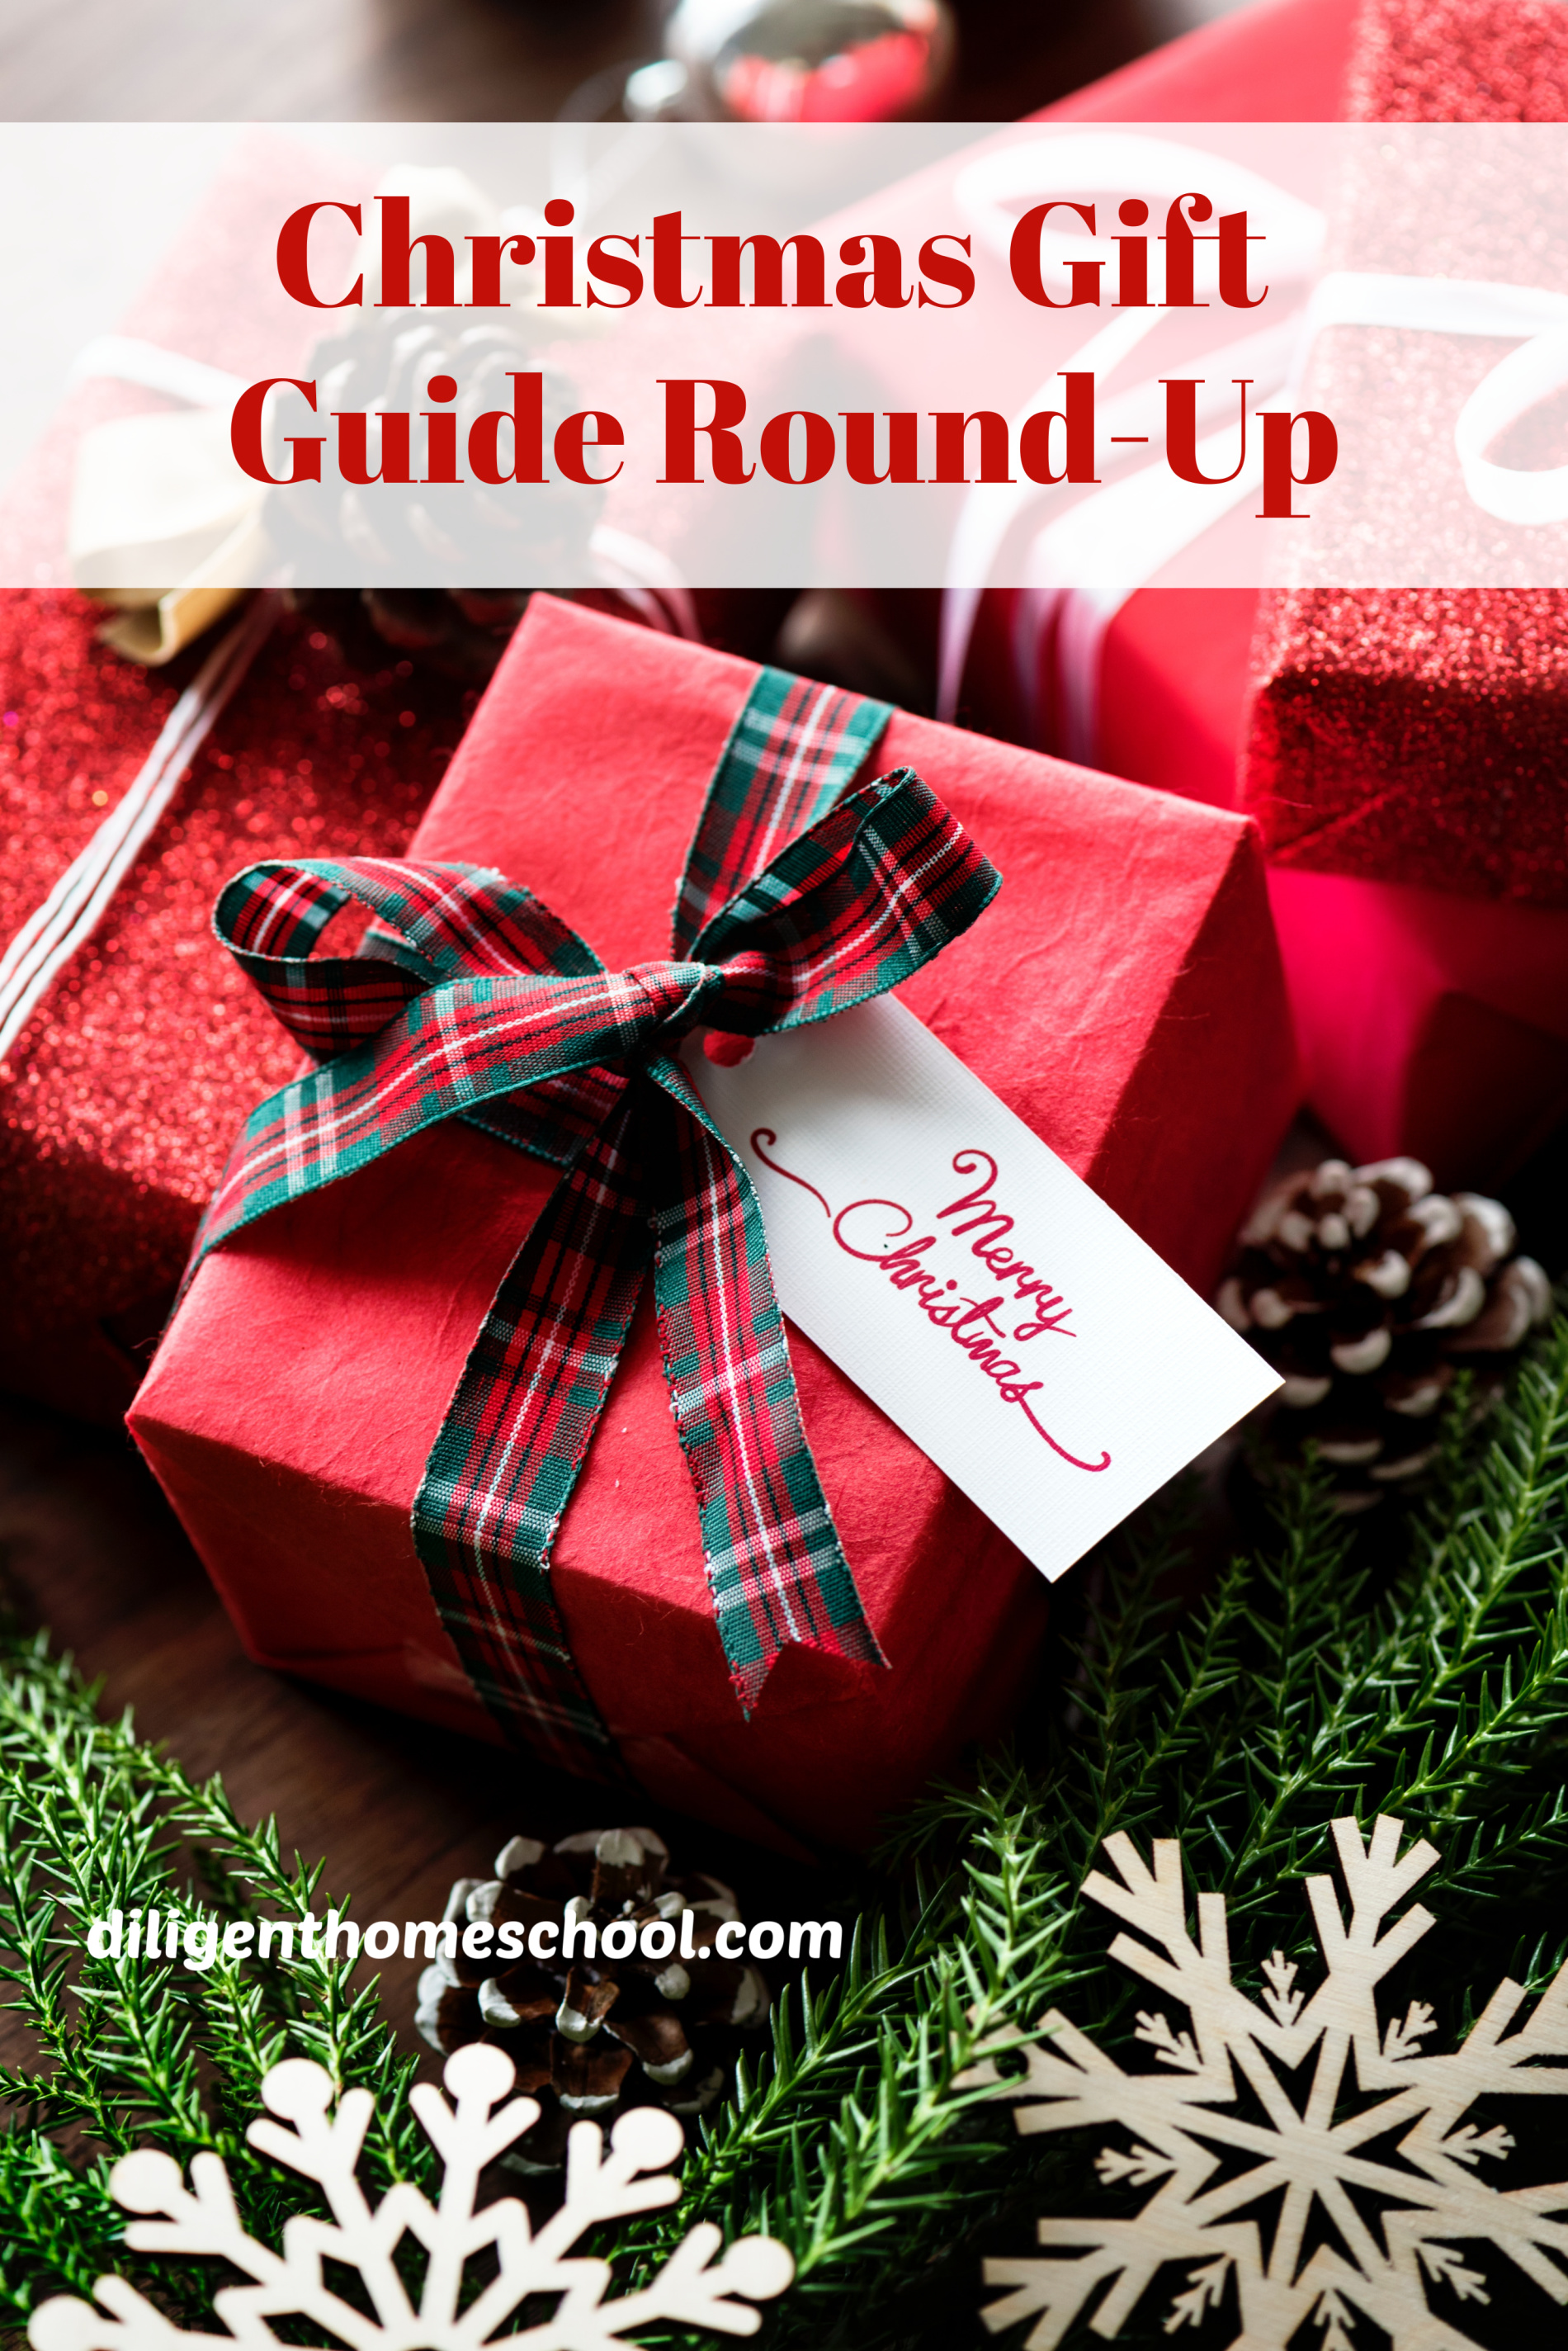 Looking for gifts for Christmas or any other time of year? Check out our Christmas Gift Guide Round-Up for ideas! 